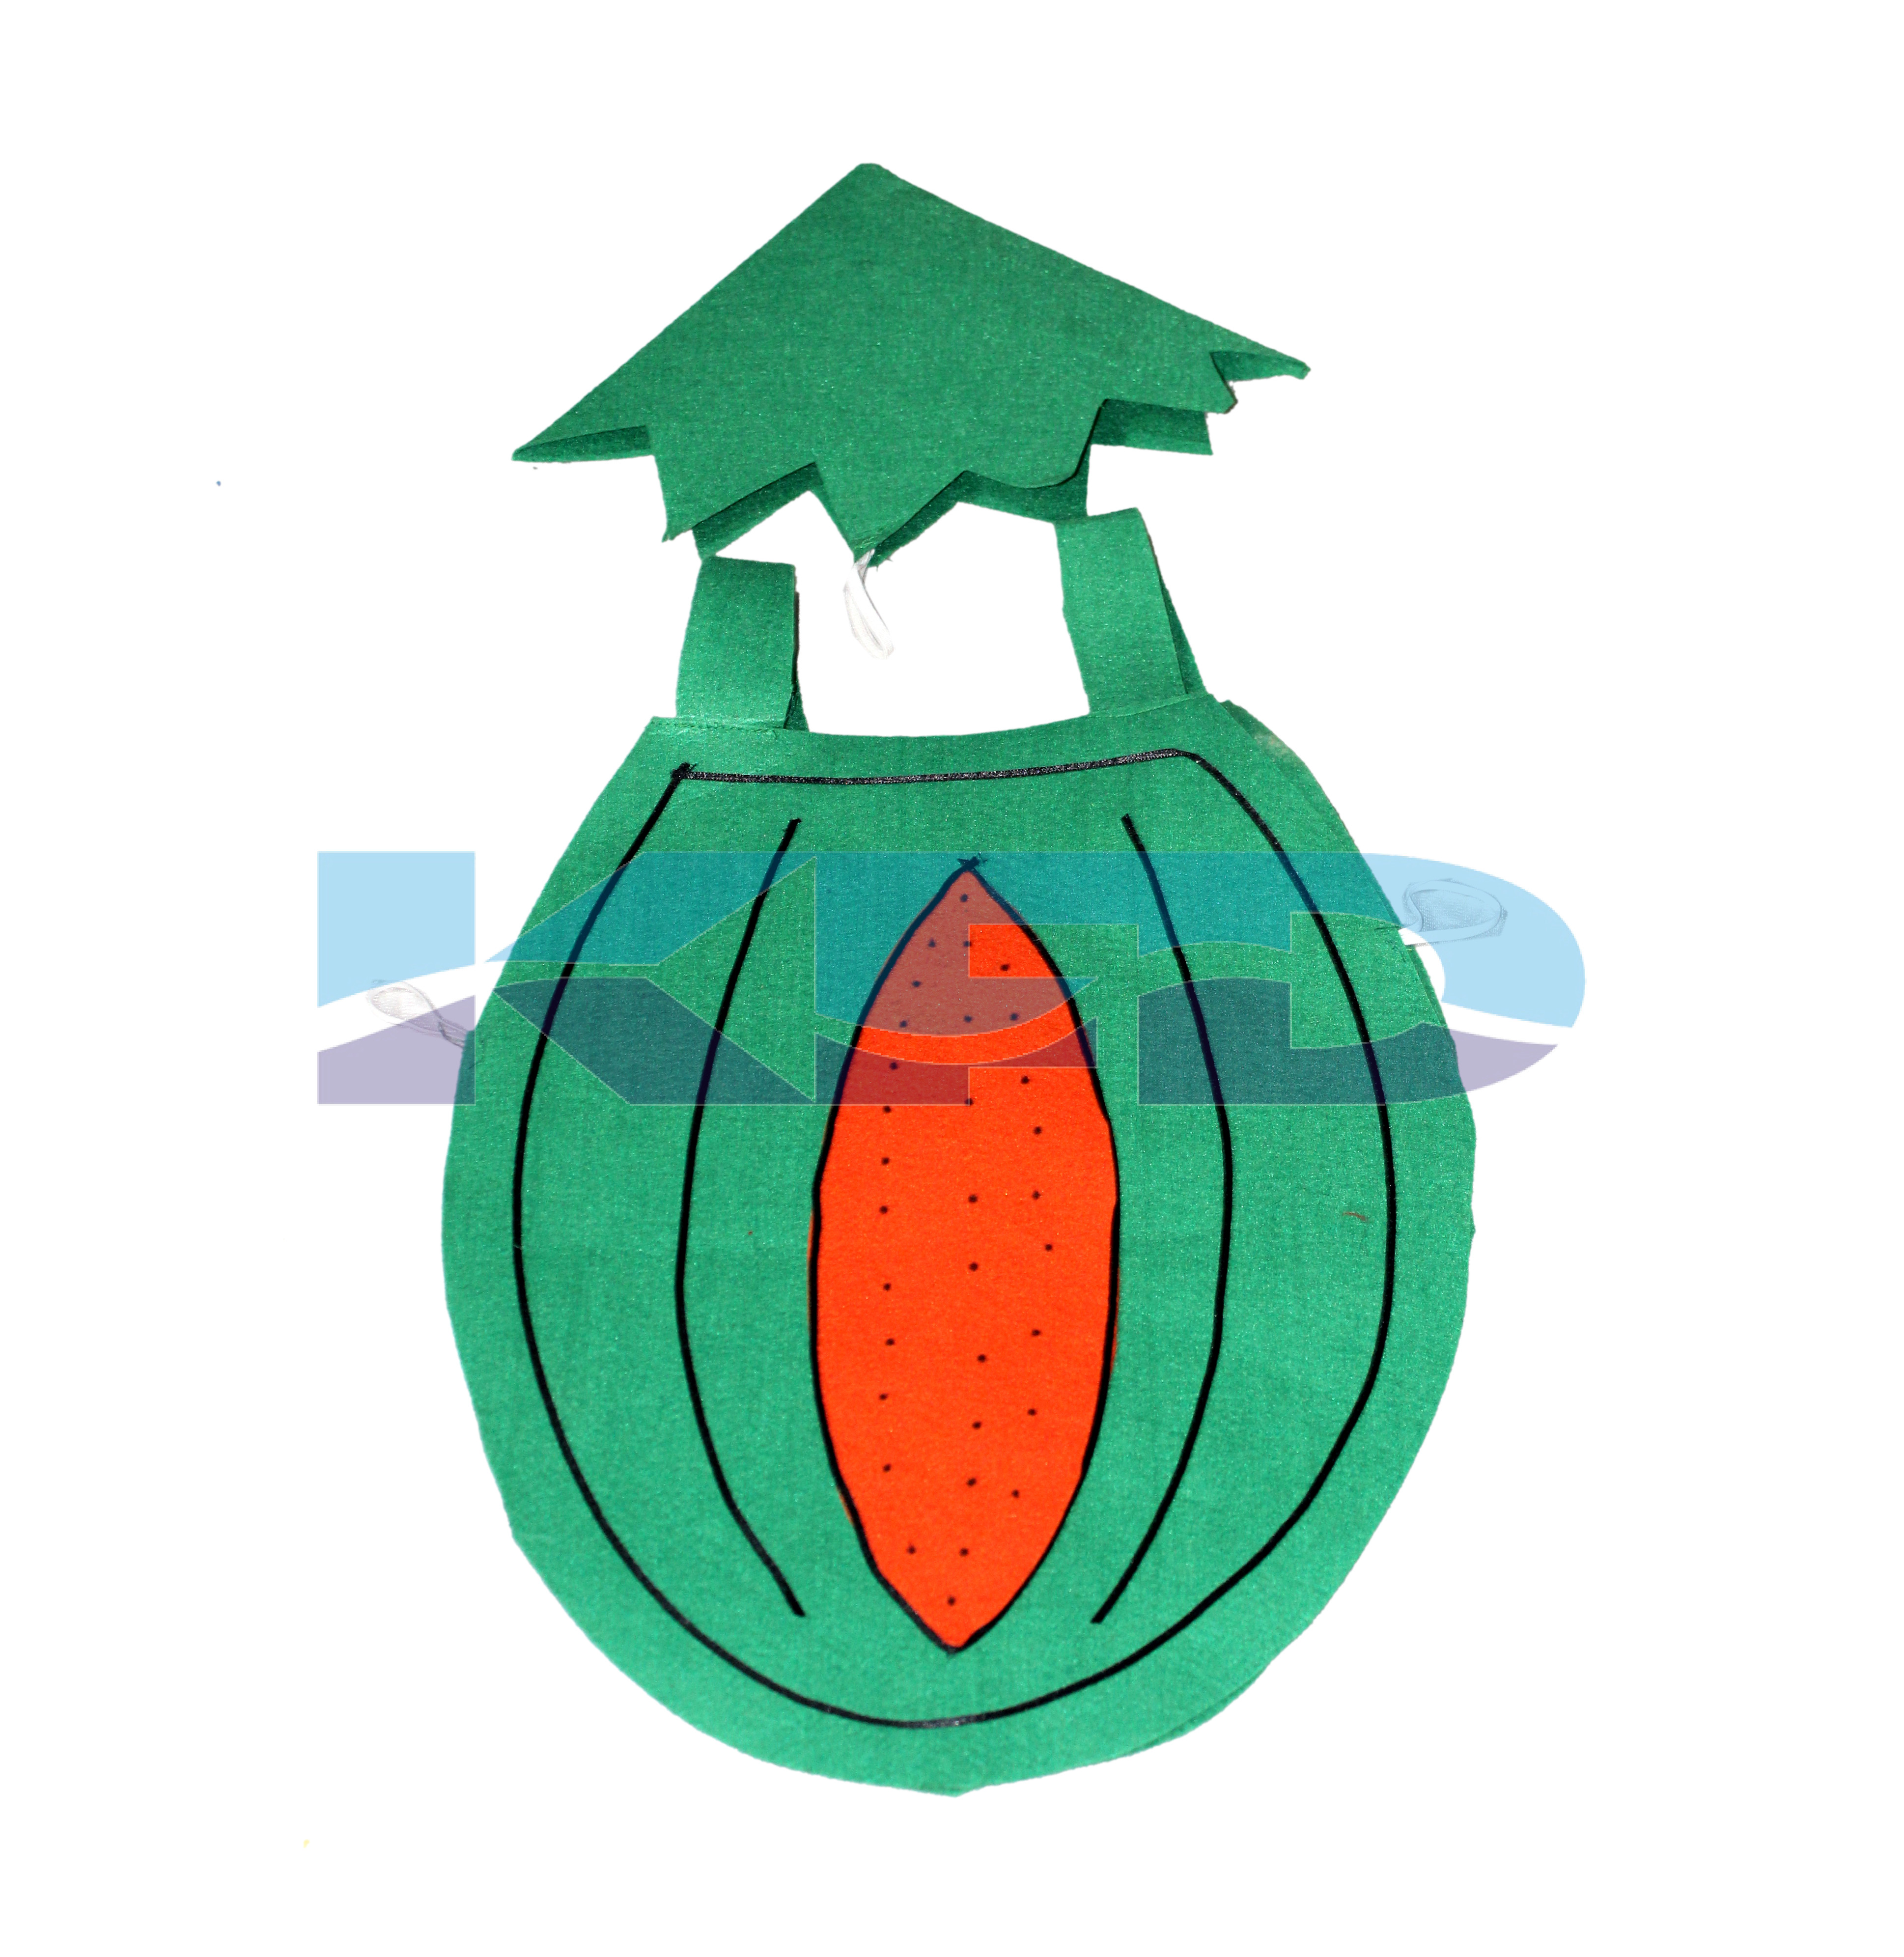  Watermelon Fruits Costume only cutout with Cap for Annual function/Theme Party/Competition/Stage Shows/Birthday Party Dress